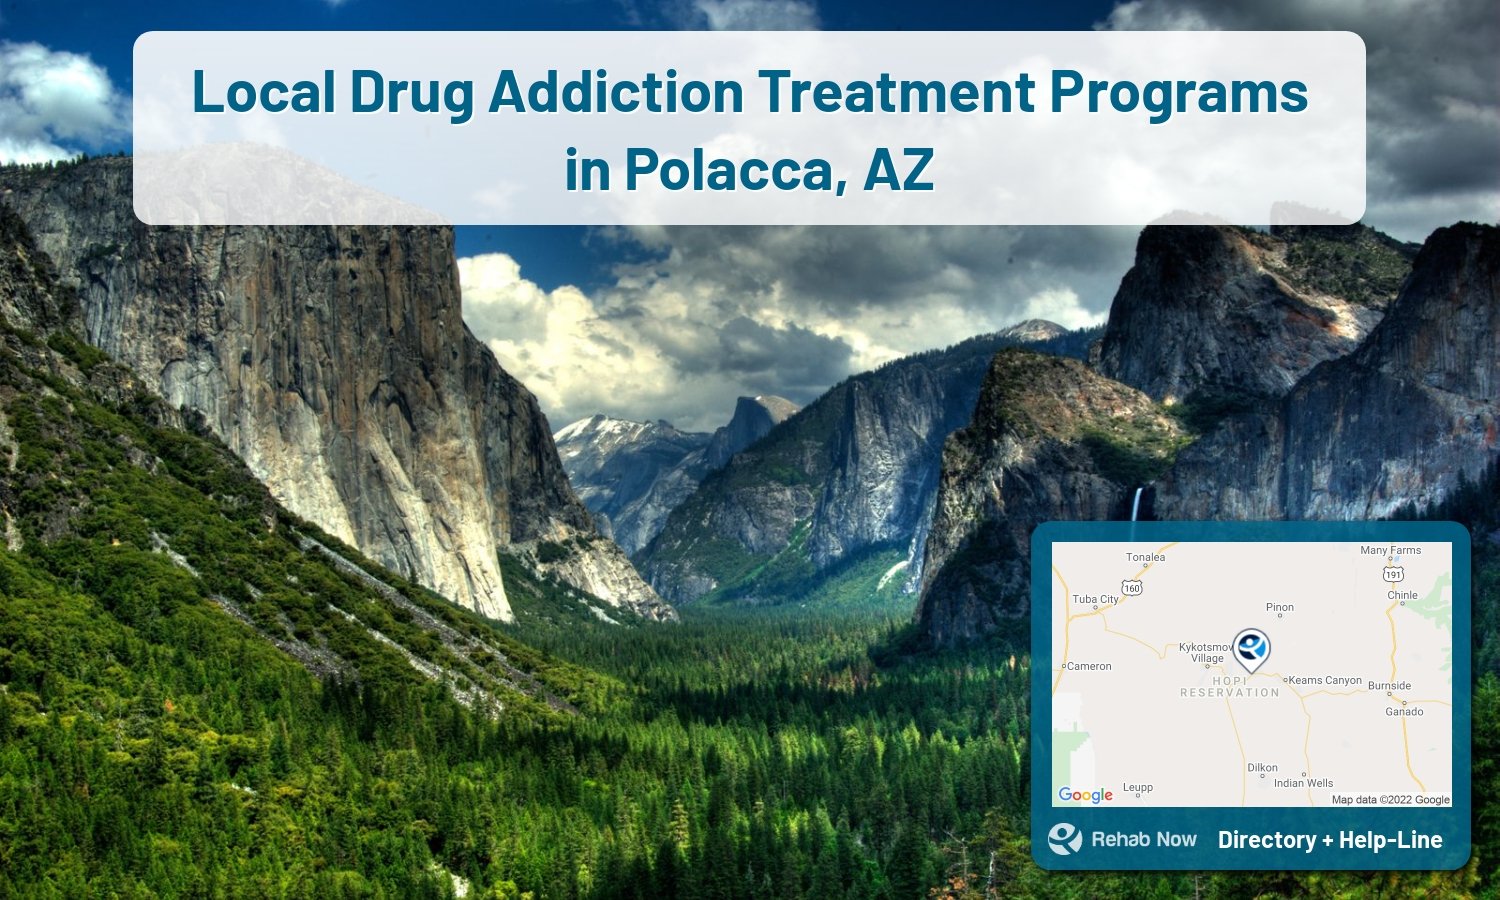 Polacca, AZ Treatment Centers. Find drug rehab in Polacca, Arizona, or detox and treatment programs. Get the right help now!